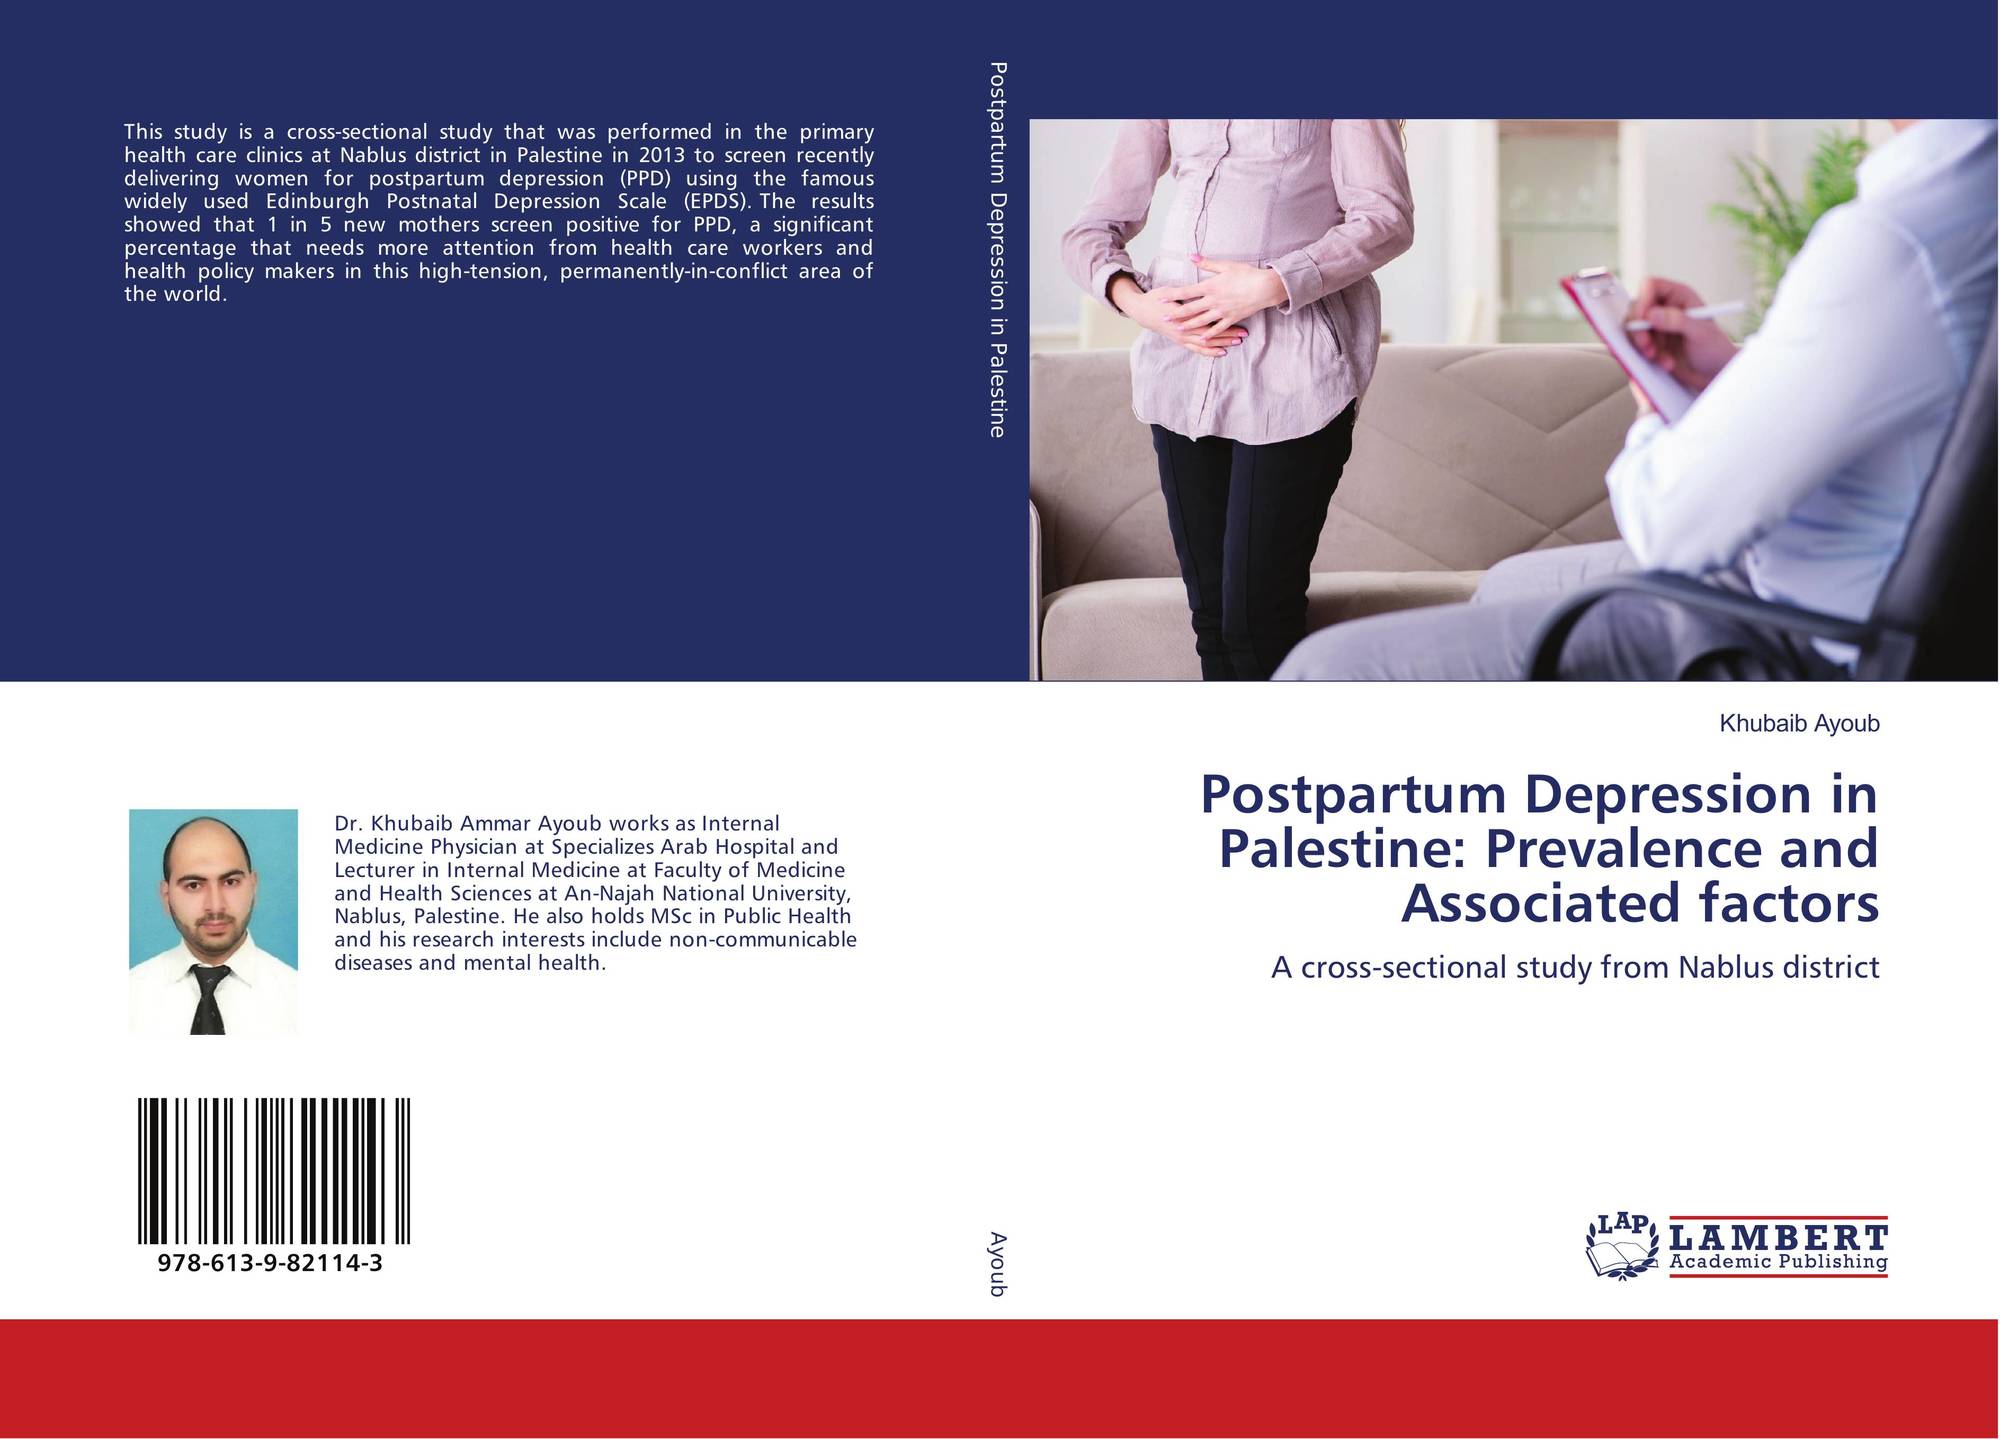 Postpartum Depression In Palestine Prevalence And Associated Factors 978 613 9 82114 3 6139821142 9786139821143 By Khubaib Ayoub